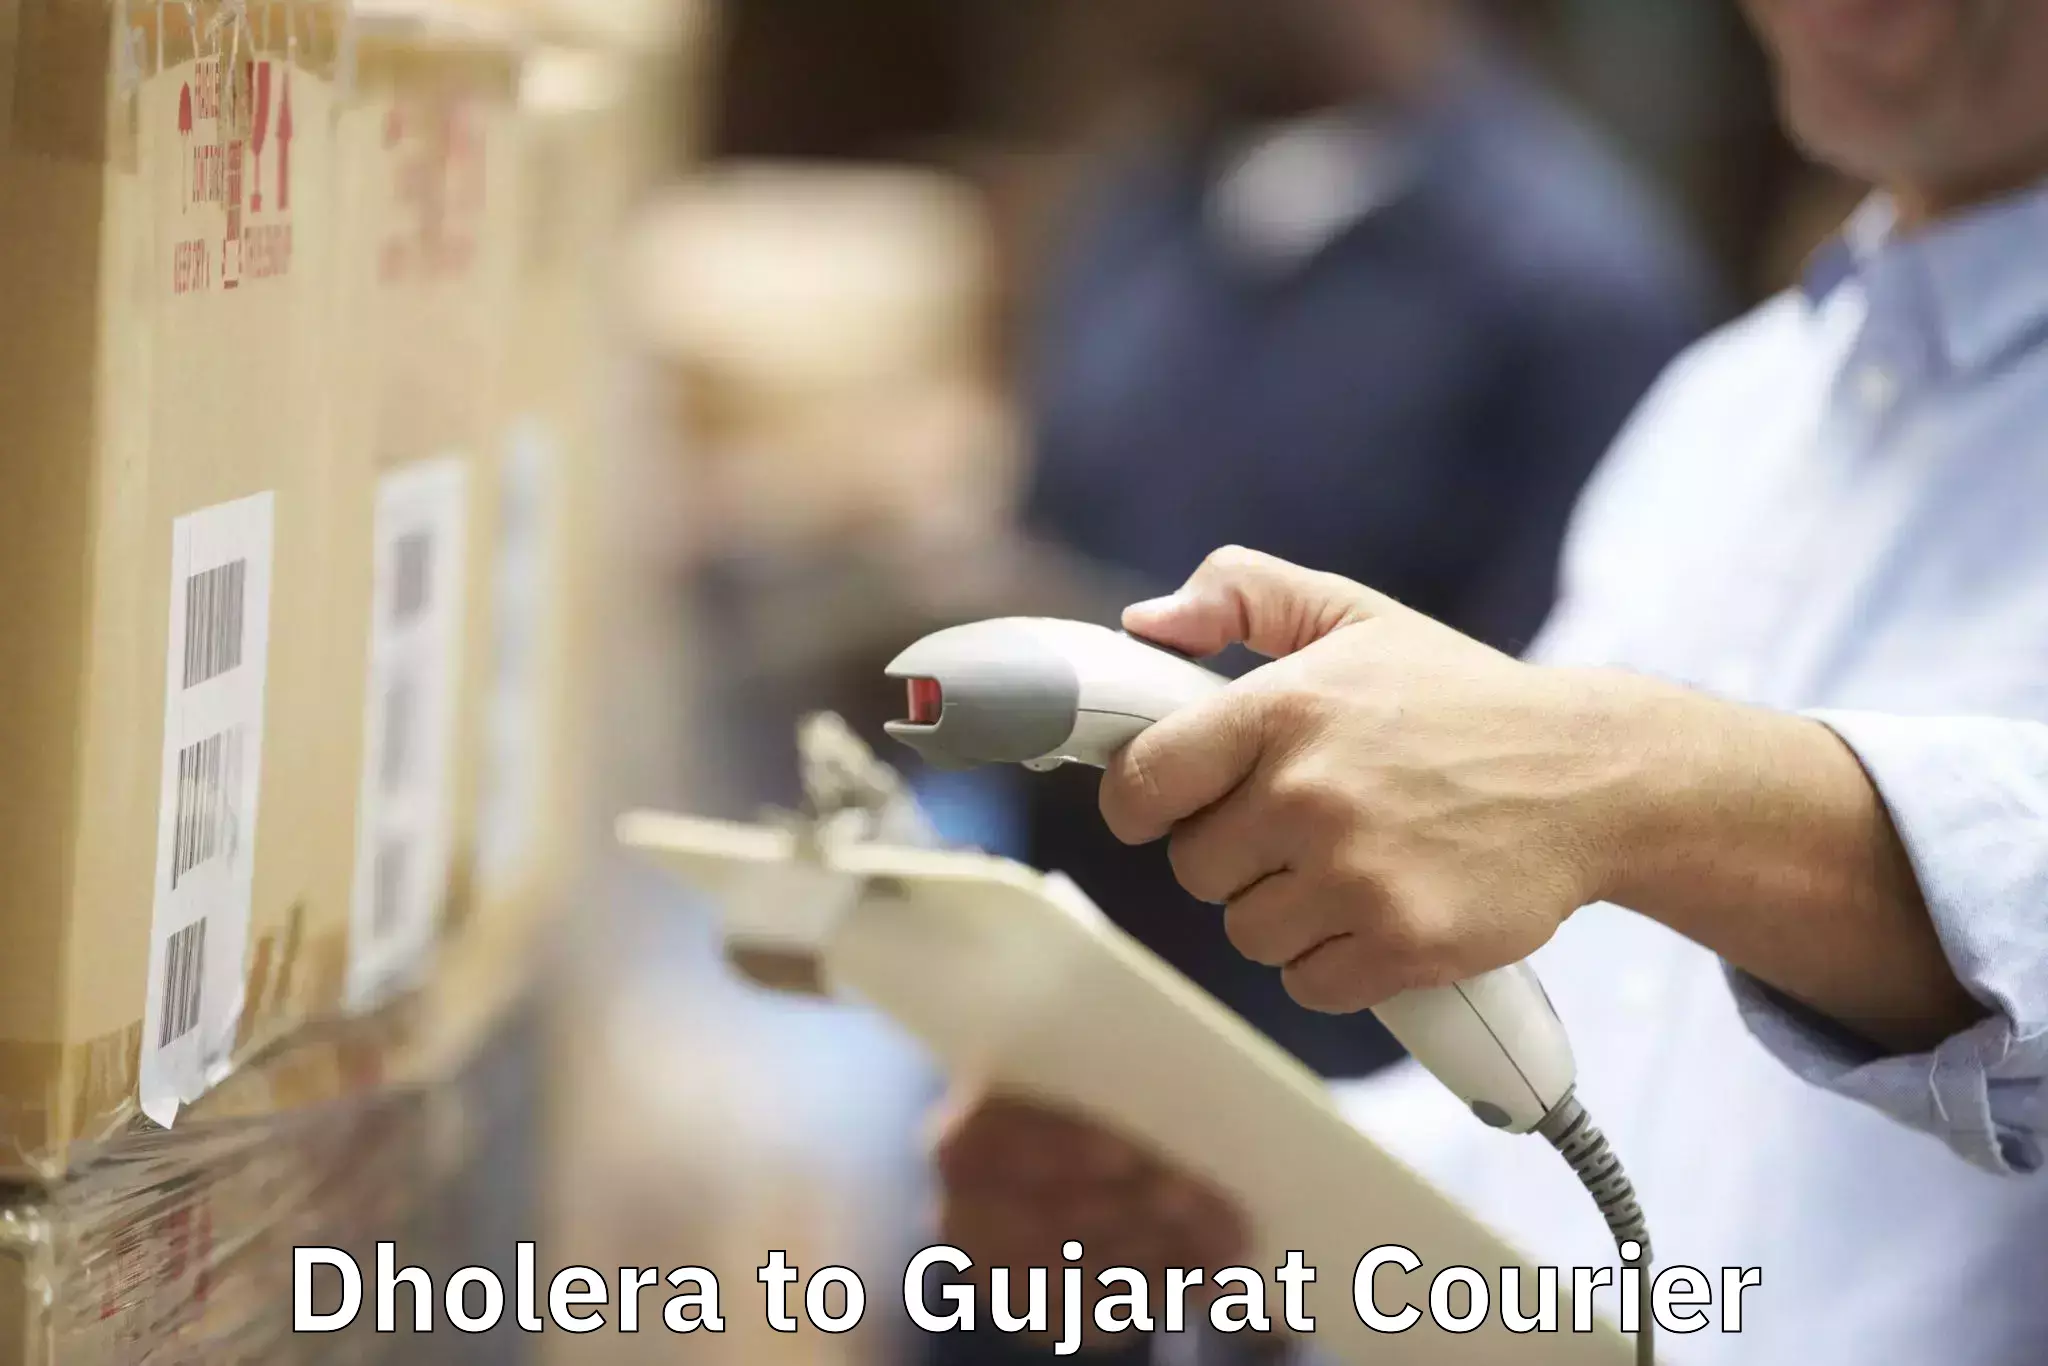 Household goods transporters Dholera to Ahmedabad